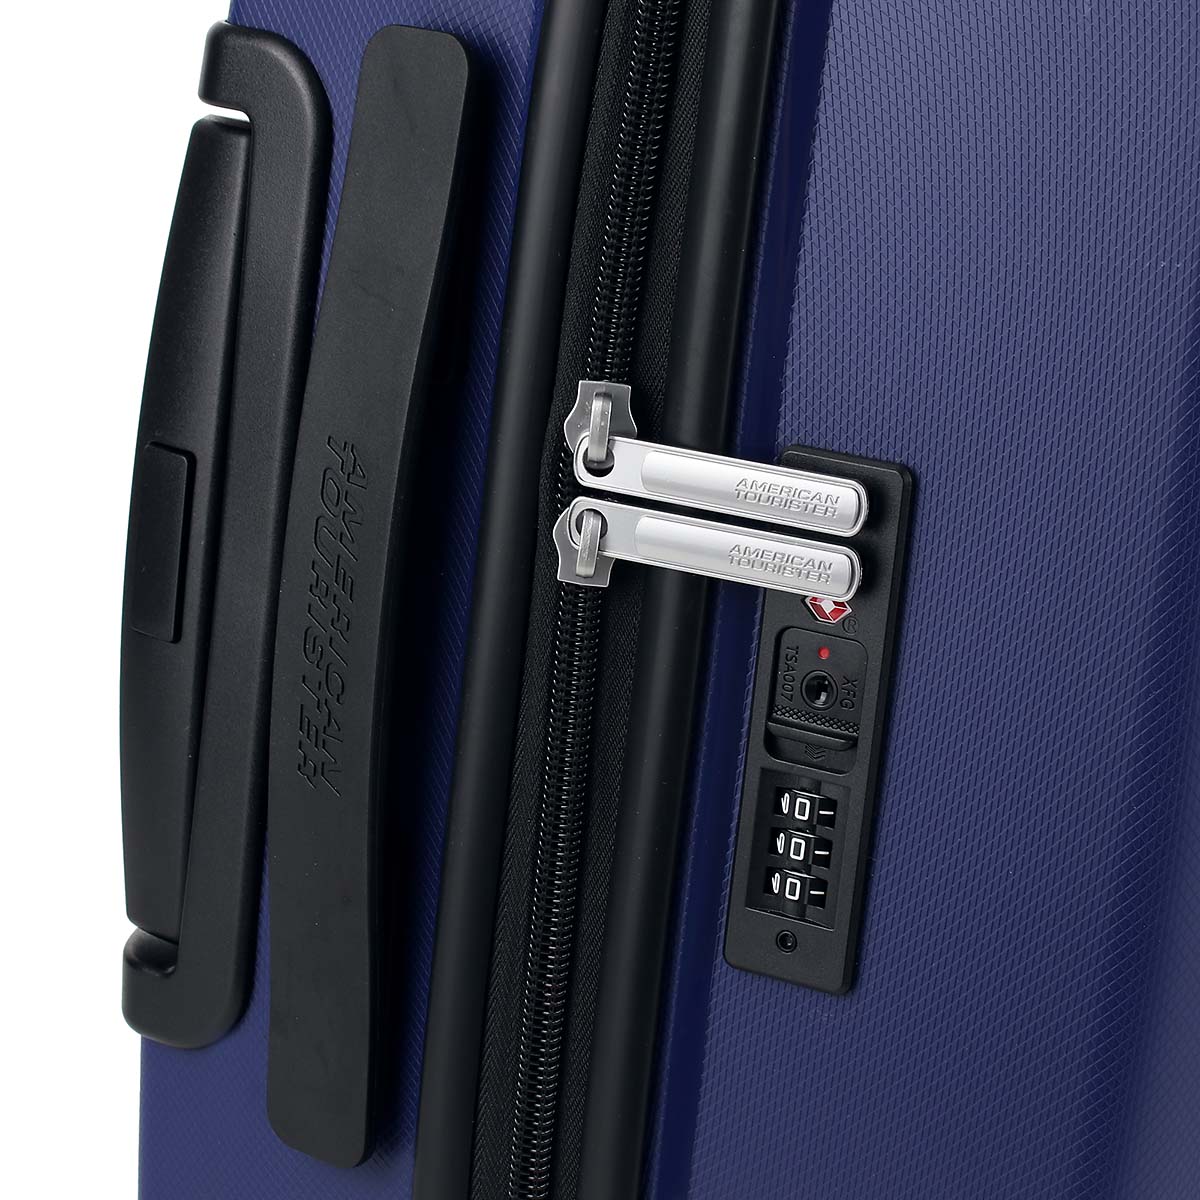 American Tourister Spinner Air Move 65cm midnight navy